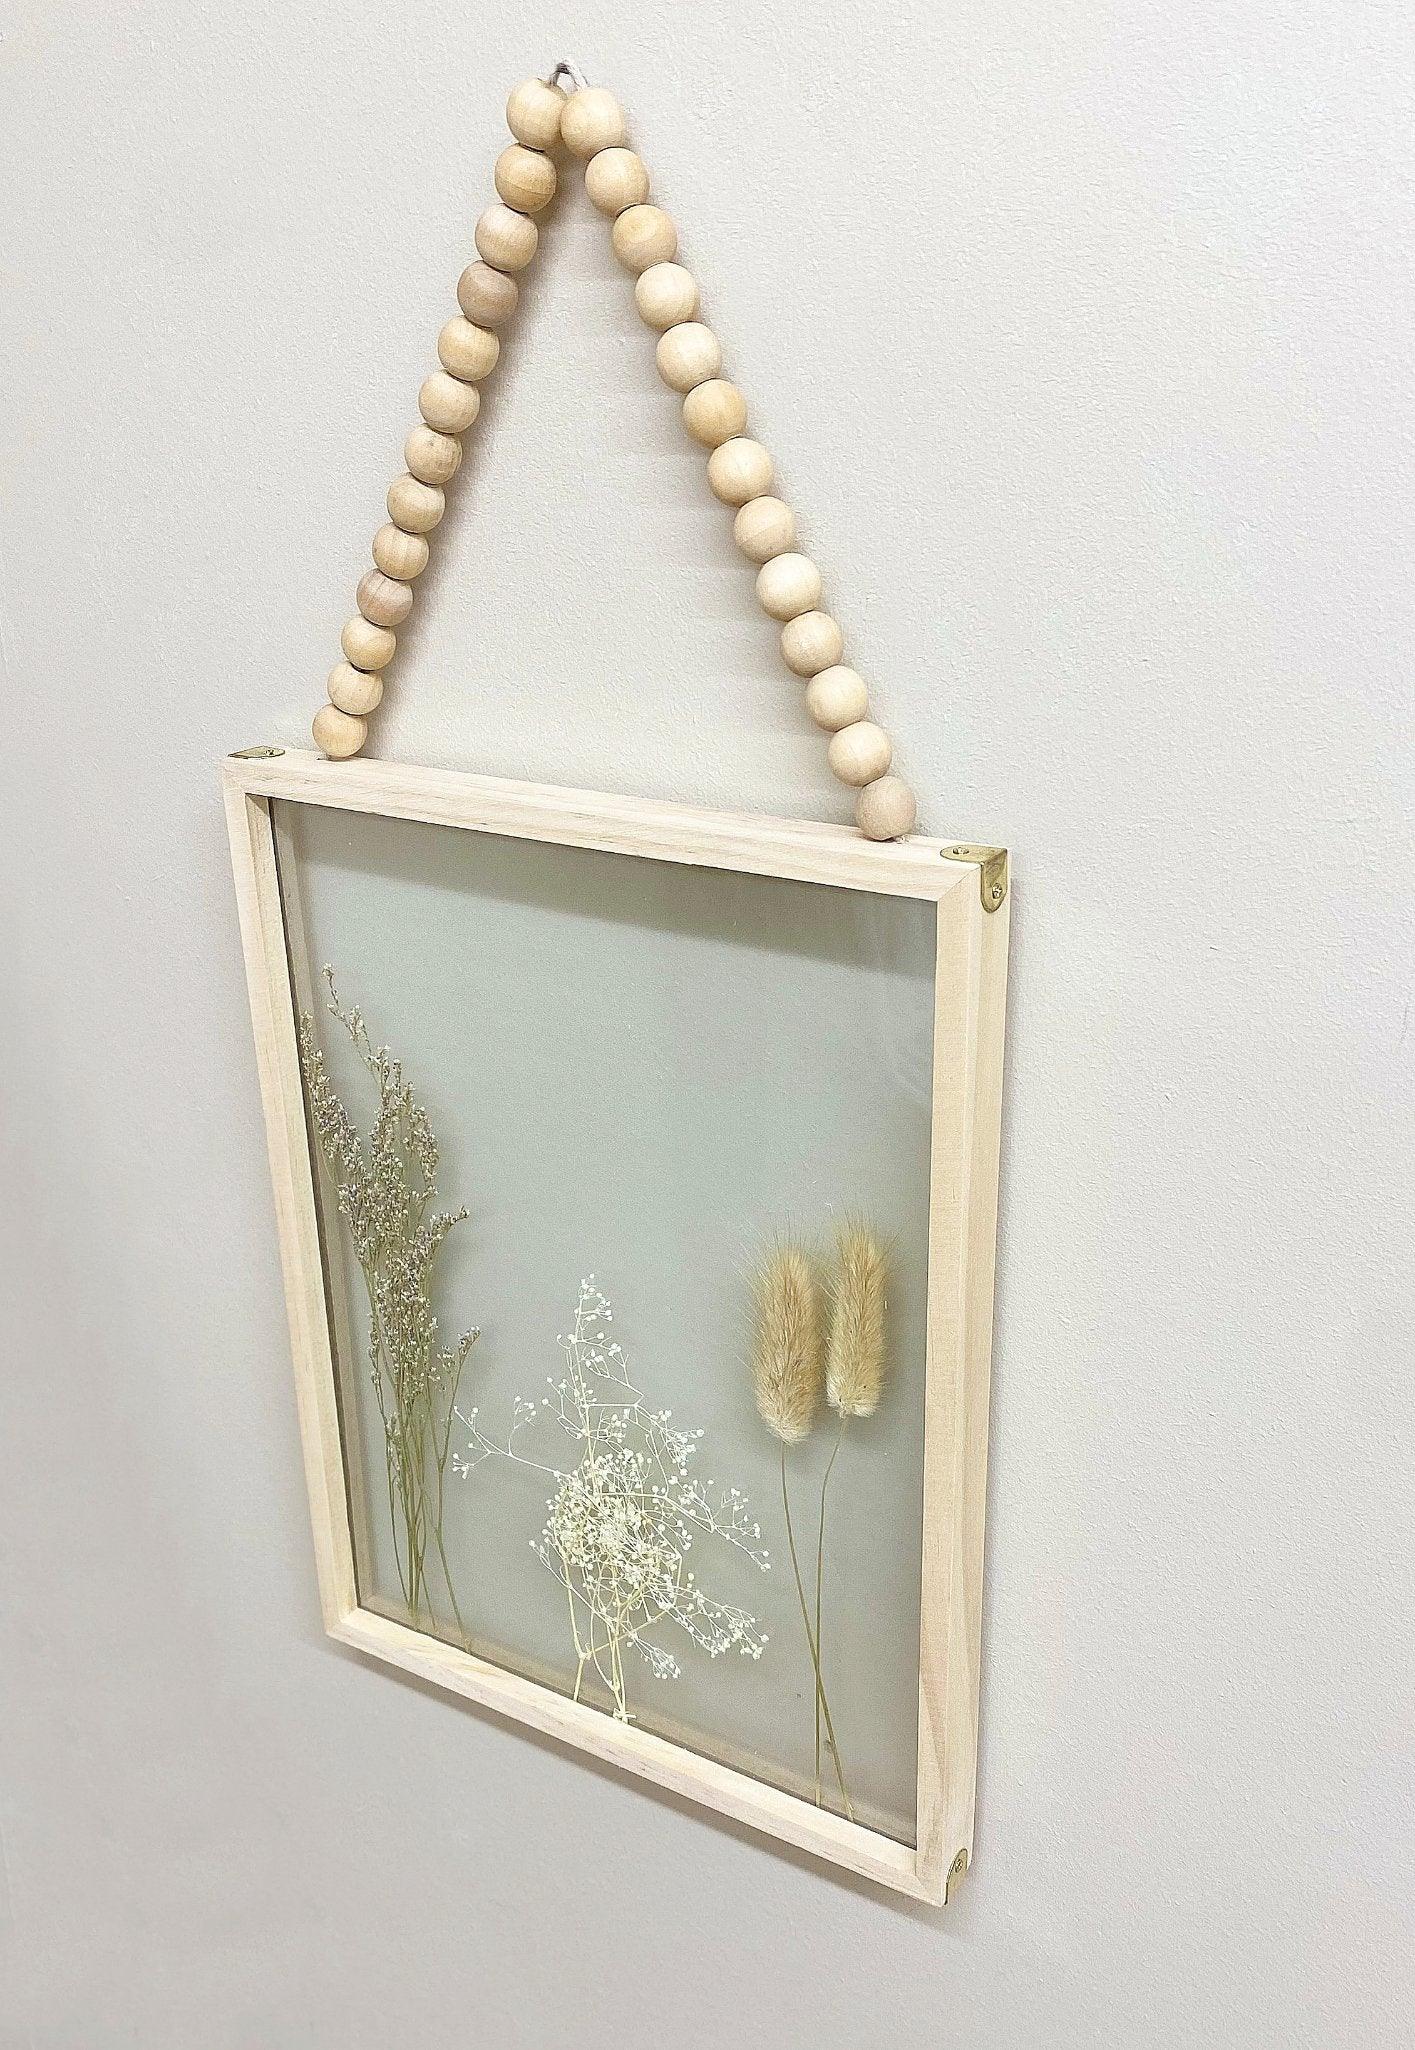 View Dried Wildflower Wall Hanging Picture information